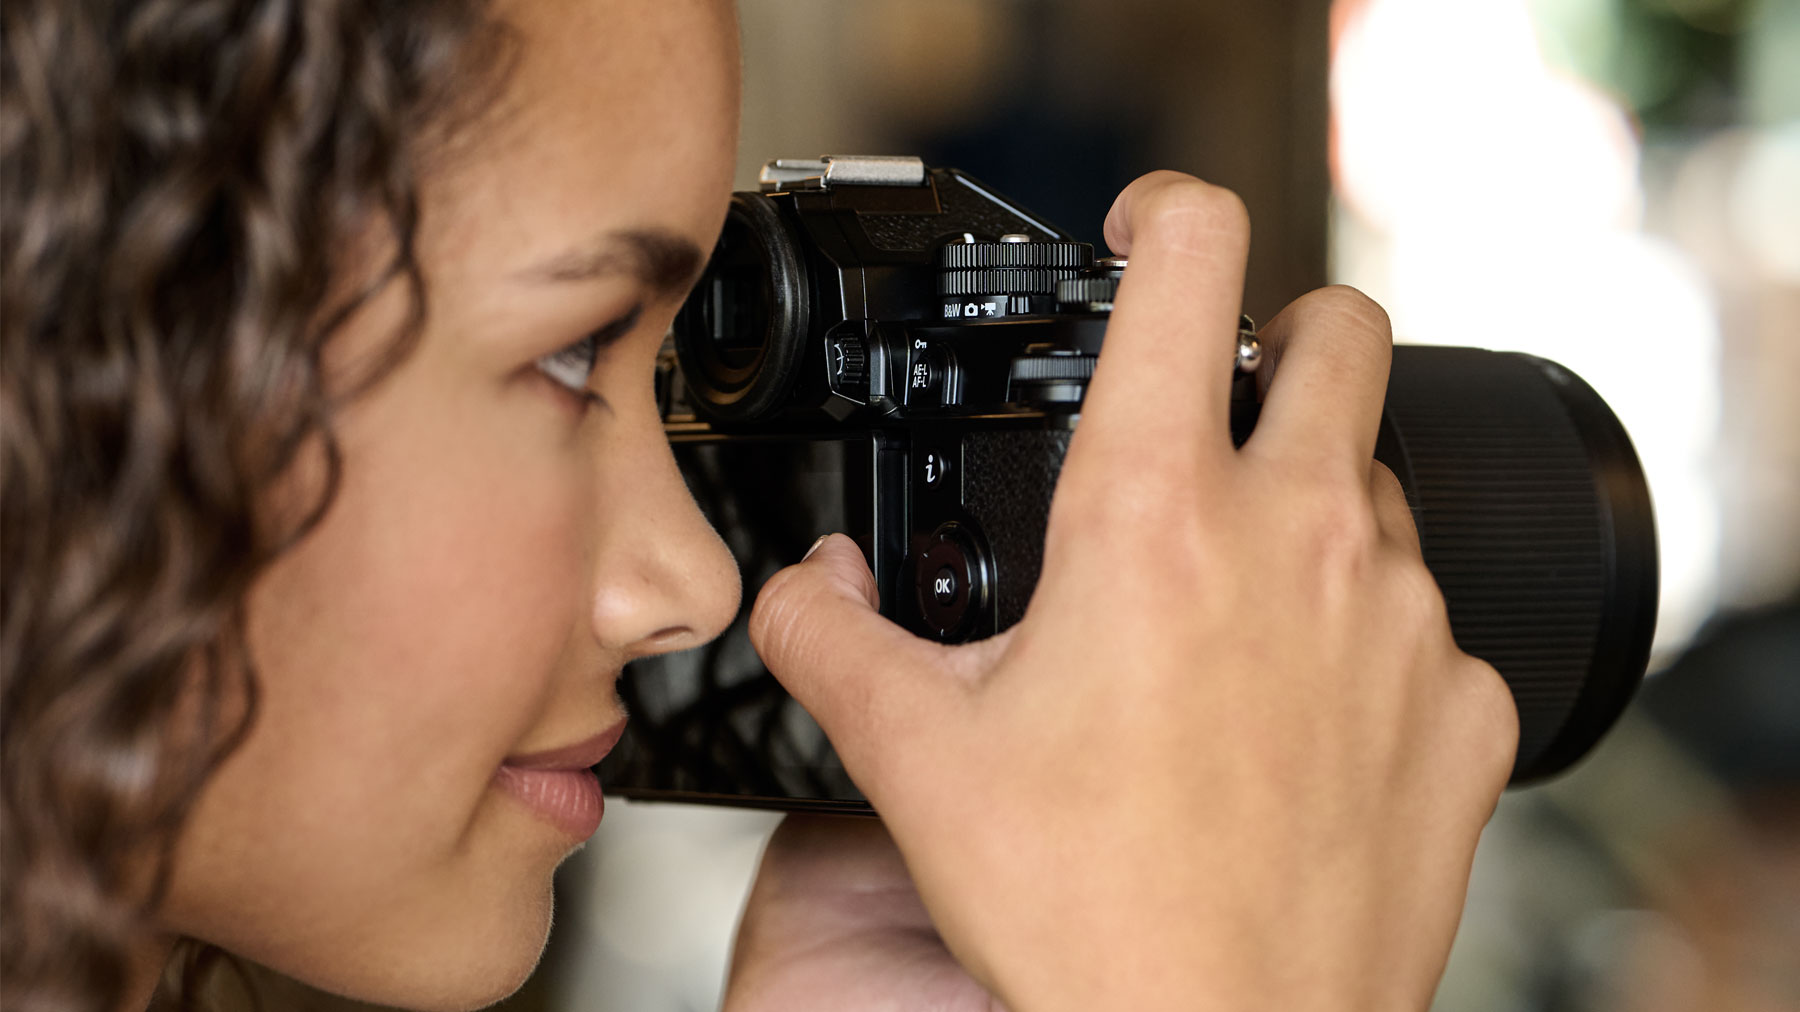 Photo of a woman with the Z f camera to her eye, getting ready to take a photo